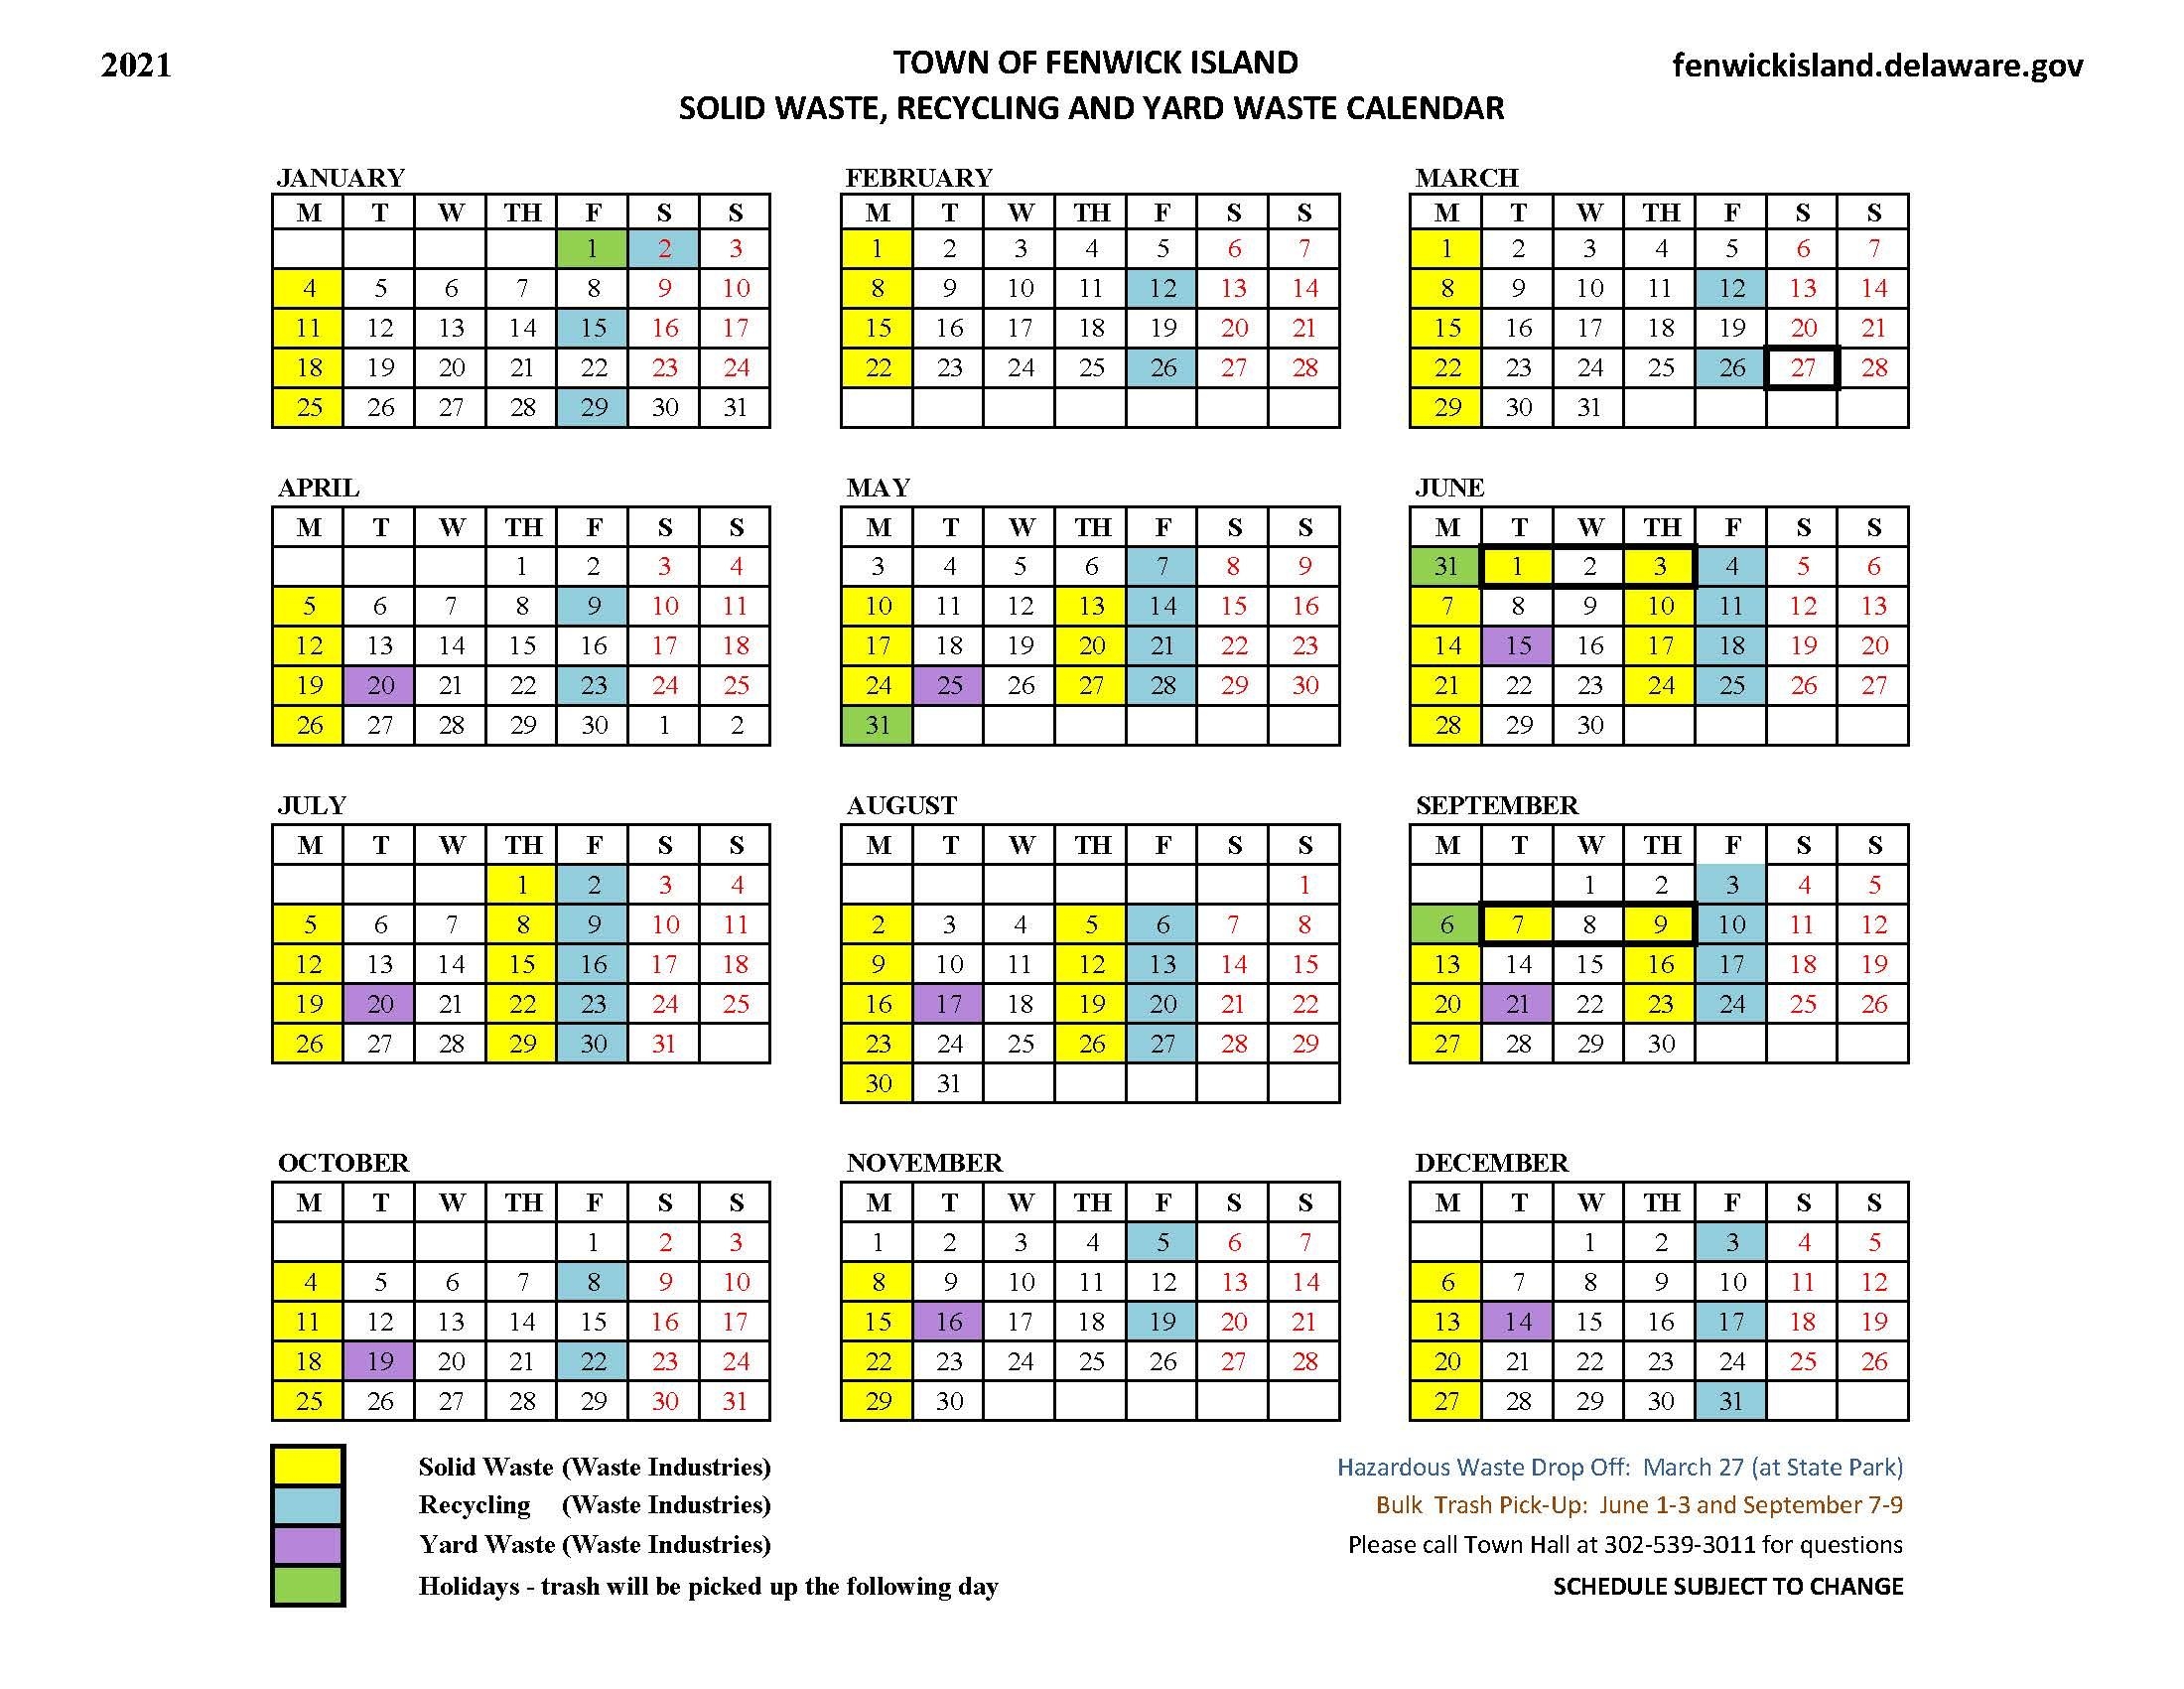 2021 Solid Waste, Recycling And Yard Waste Calendar